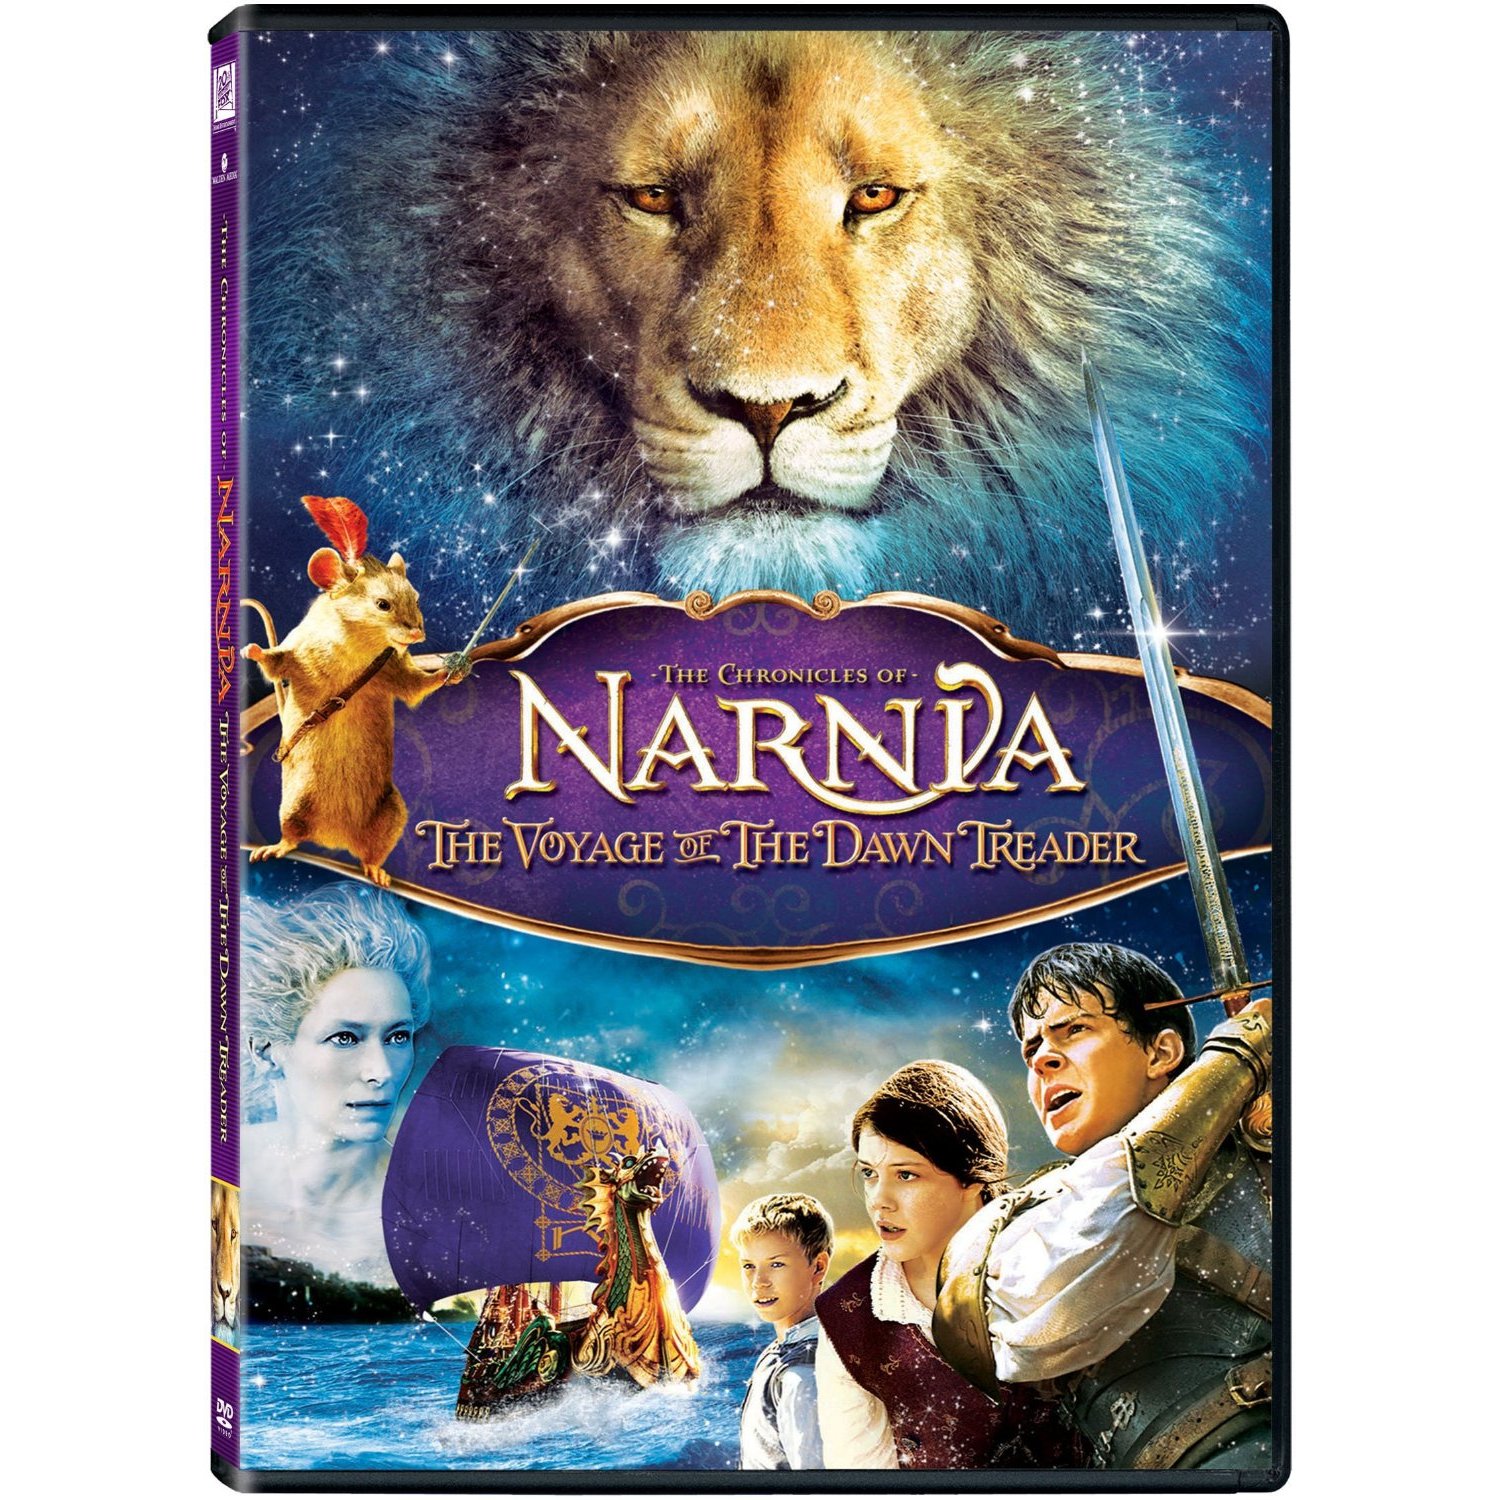 The Chronicles Of Narnia: The Voyage of the Dawn Treader